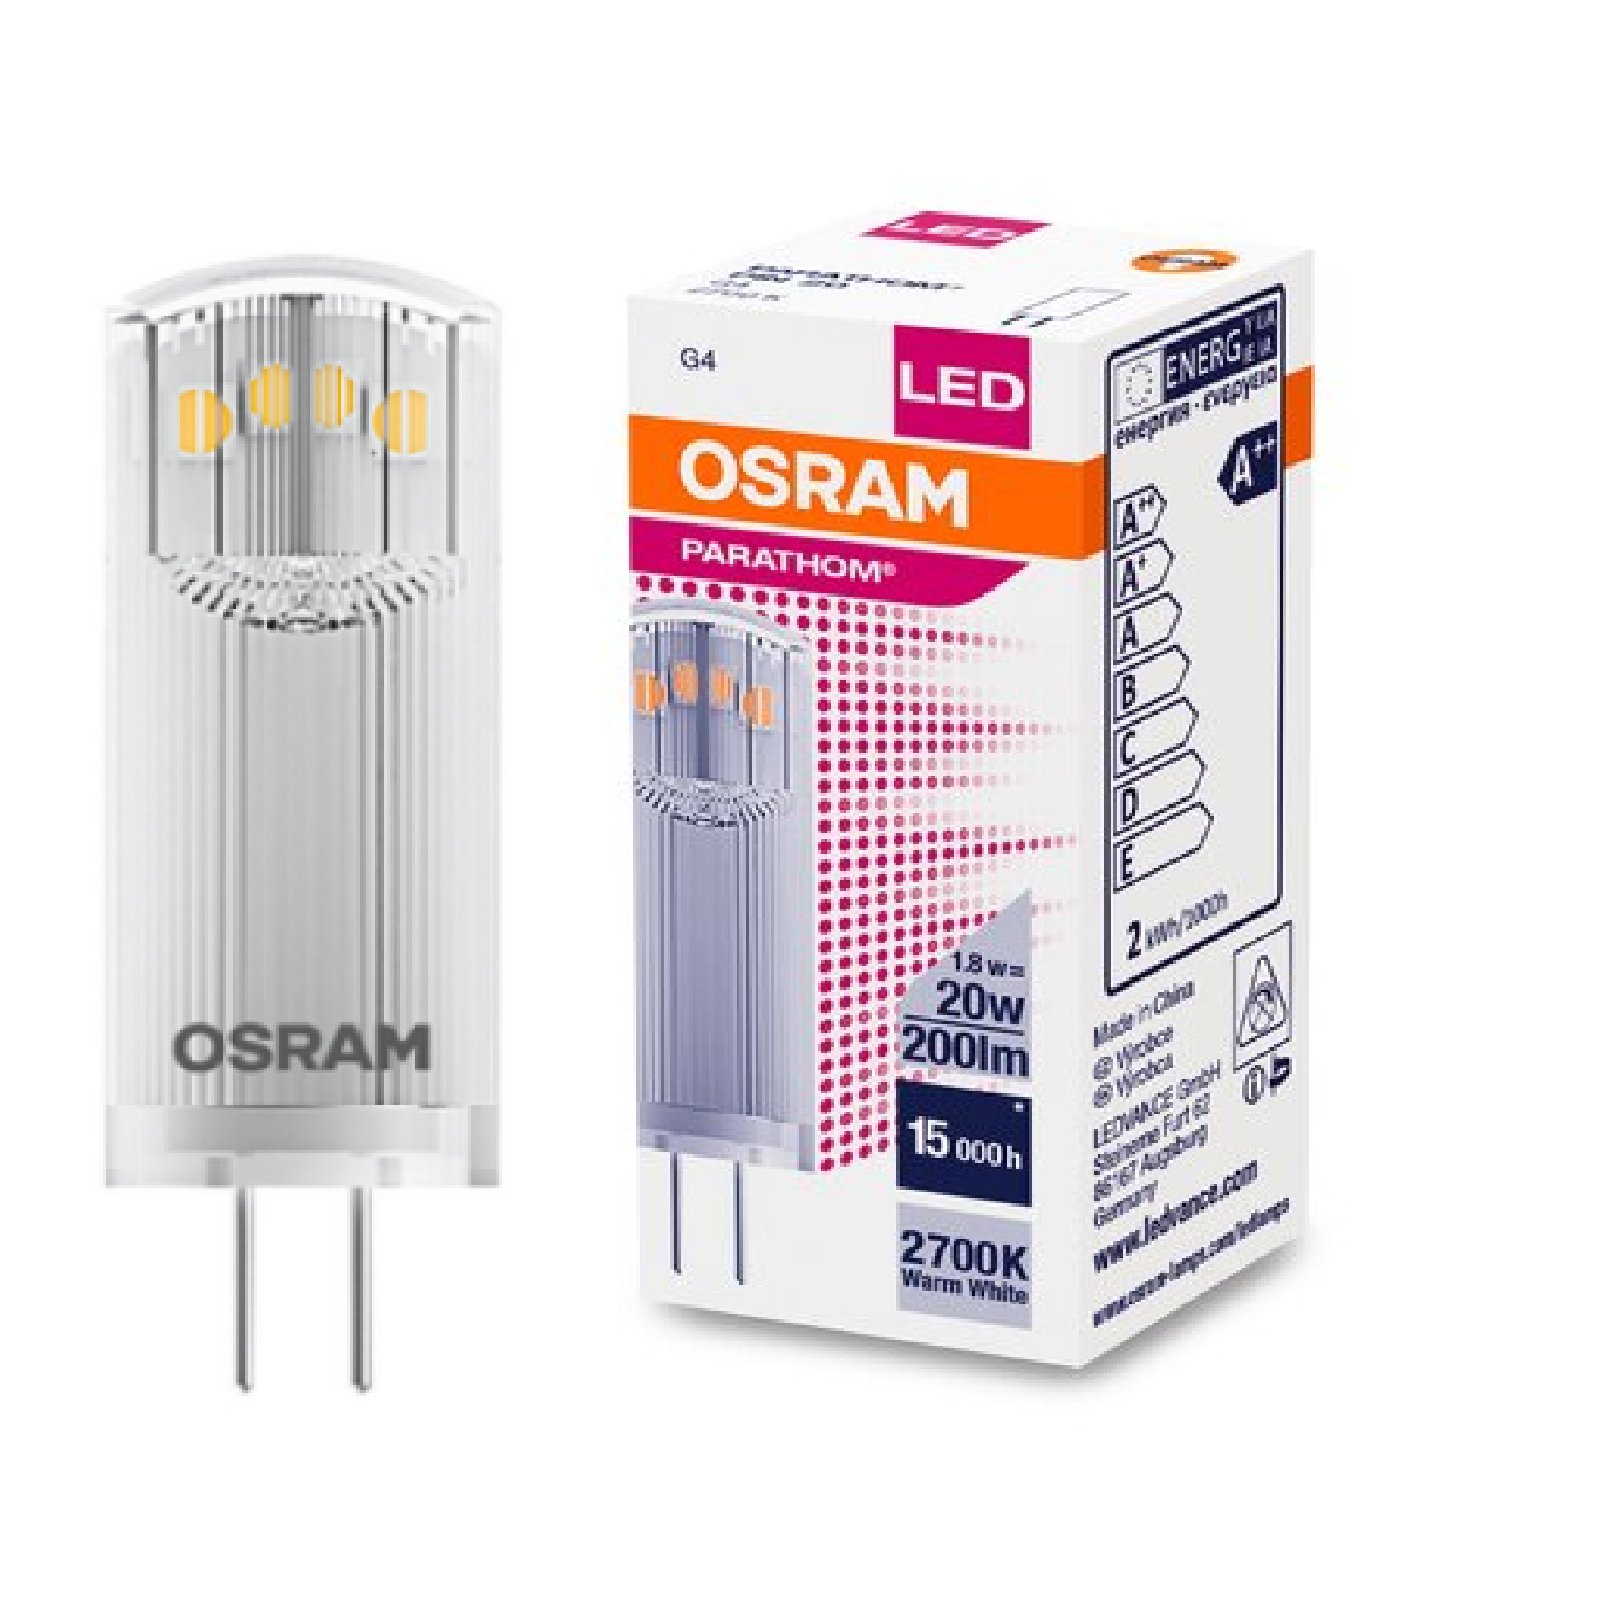 Osram Parathom LED PIN G4 12V 1.8W 200 LUMENS 827 Warm White NON-DIMMABLE Replaces 20W